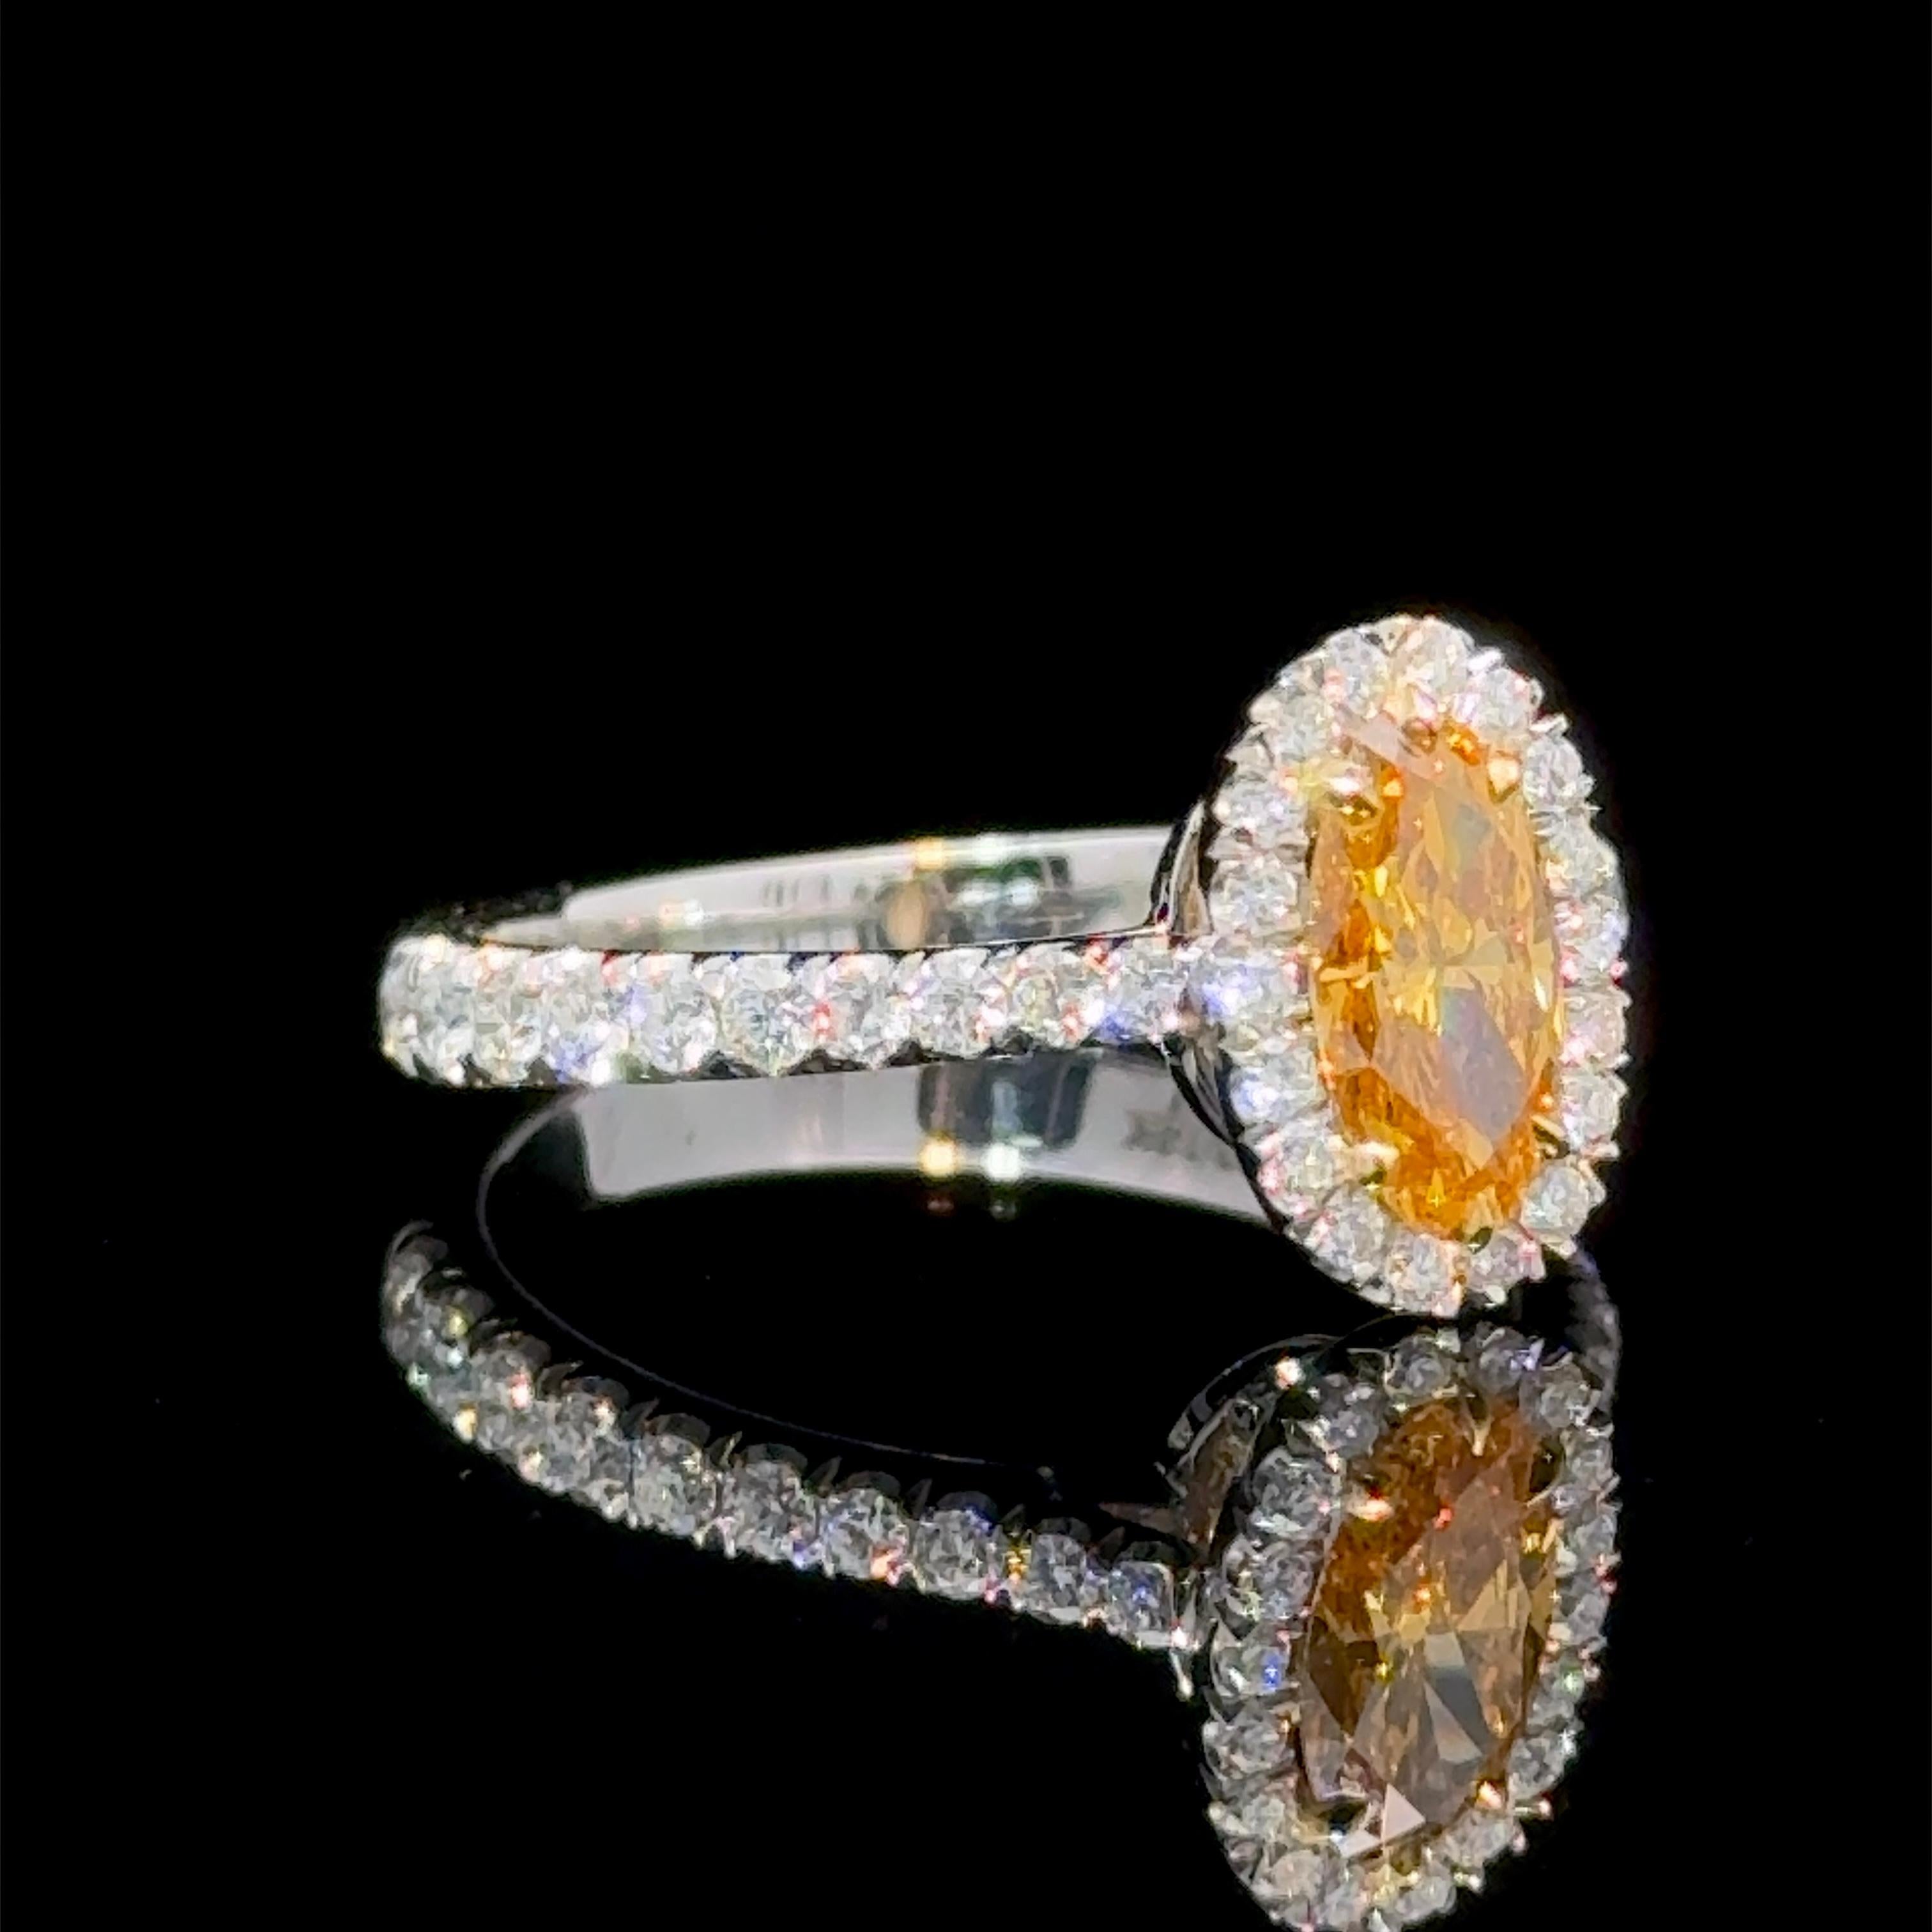 A GIA Certified 0.62 Carat Natural Vivid Orange Diamond Halo Ring
Cut and Natural Color came together to produce a stunning Orange Hue
Center stone is Graded by the GIA as Fancy Vivid Yellow-Orange. SI2 Clarity.
The Cut on Center Elongated Oval Cut,